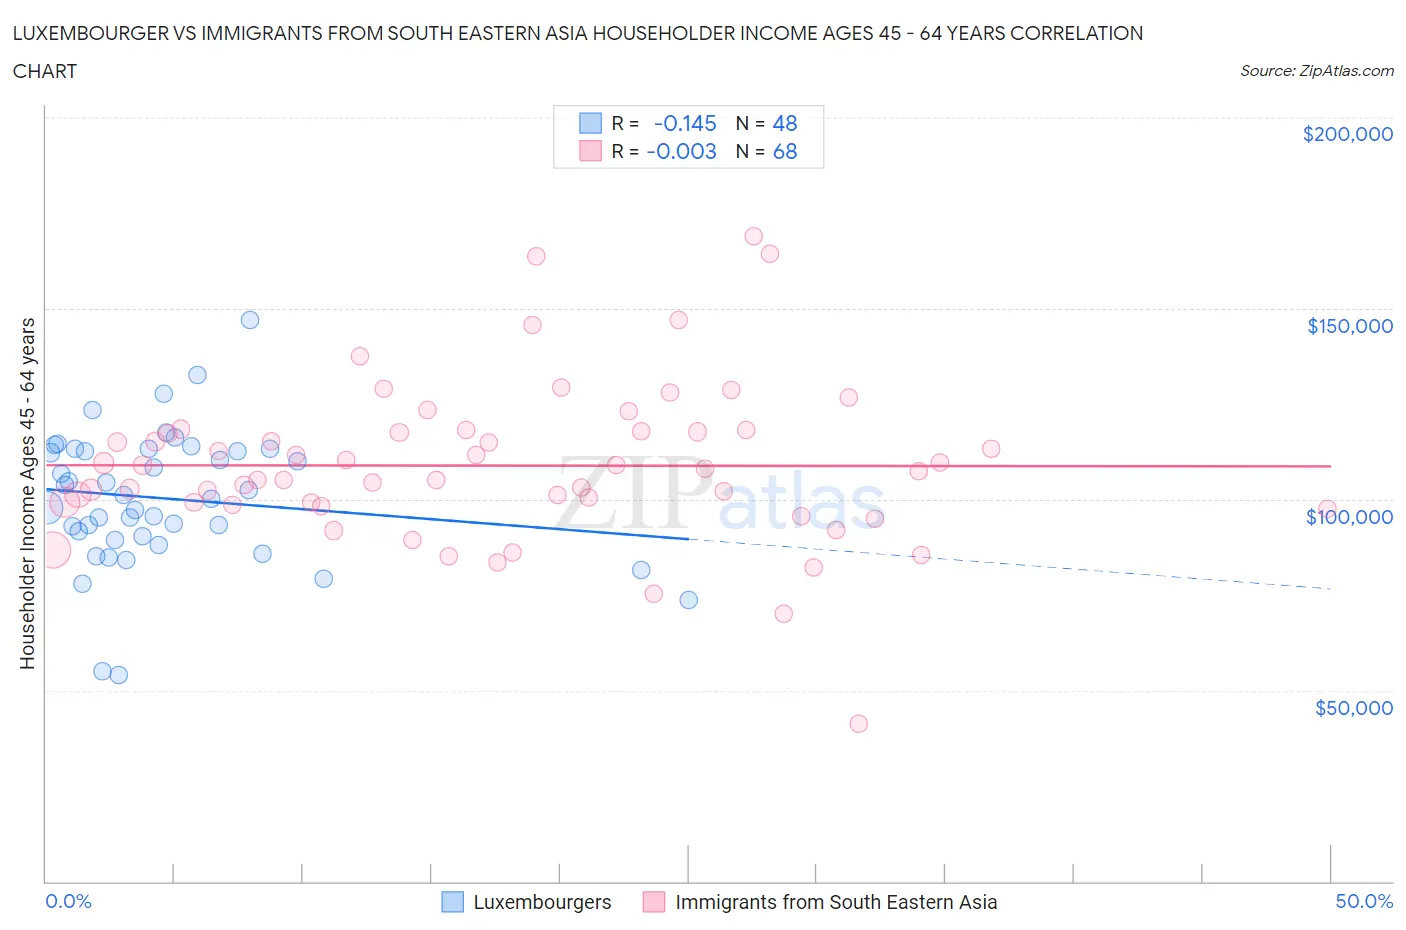 Luxembourger vs Immigrants from South Eastern Asia Householder Income Ages 45 - 64 years